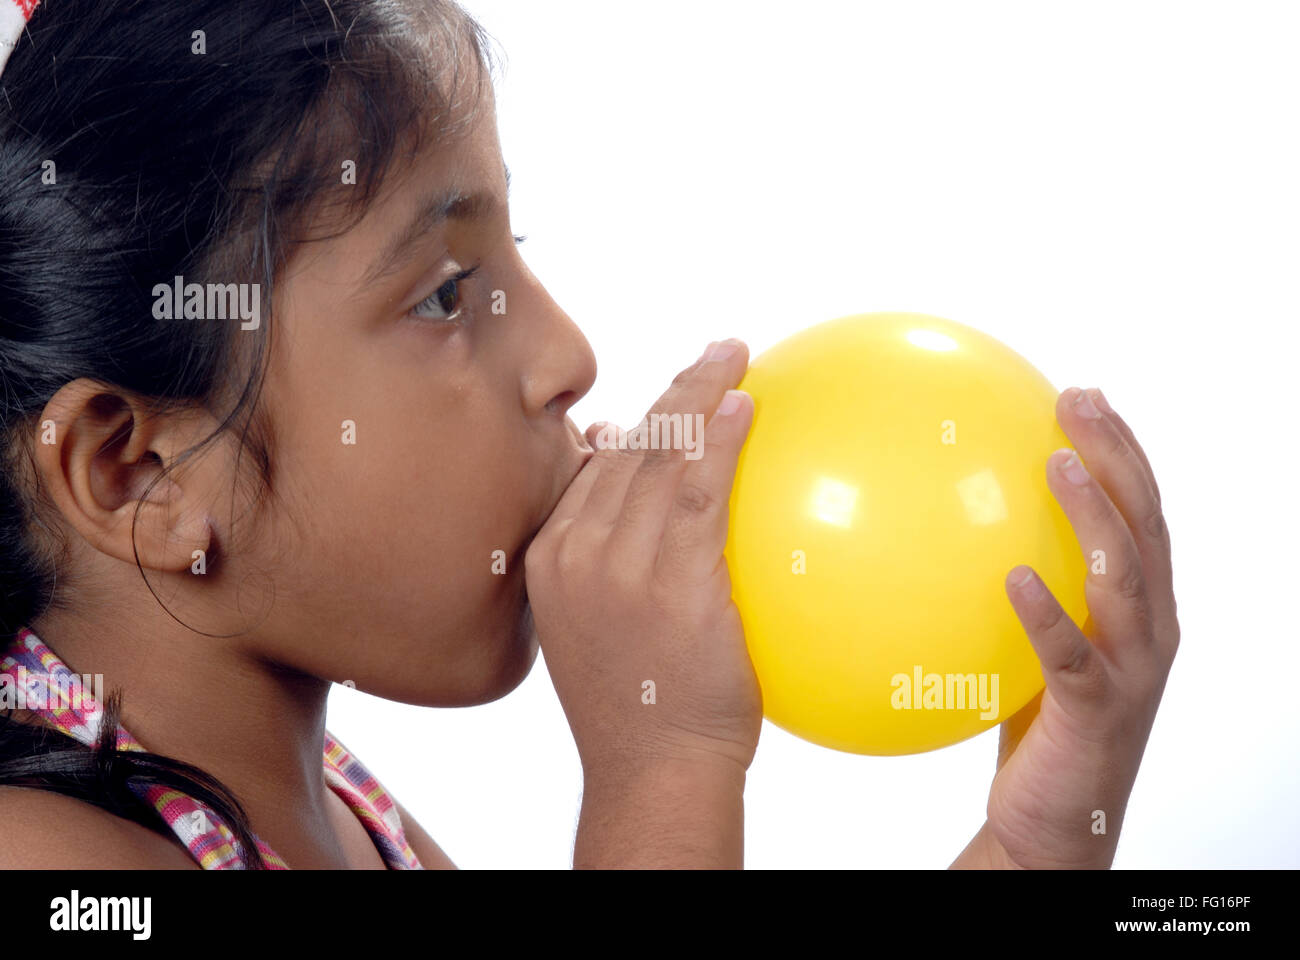 South Asian Indian six year old girl blowing yellow color balloon from mouth MR#364 Stock Photo